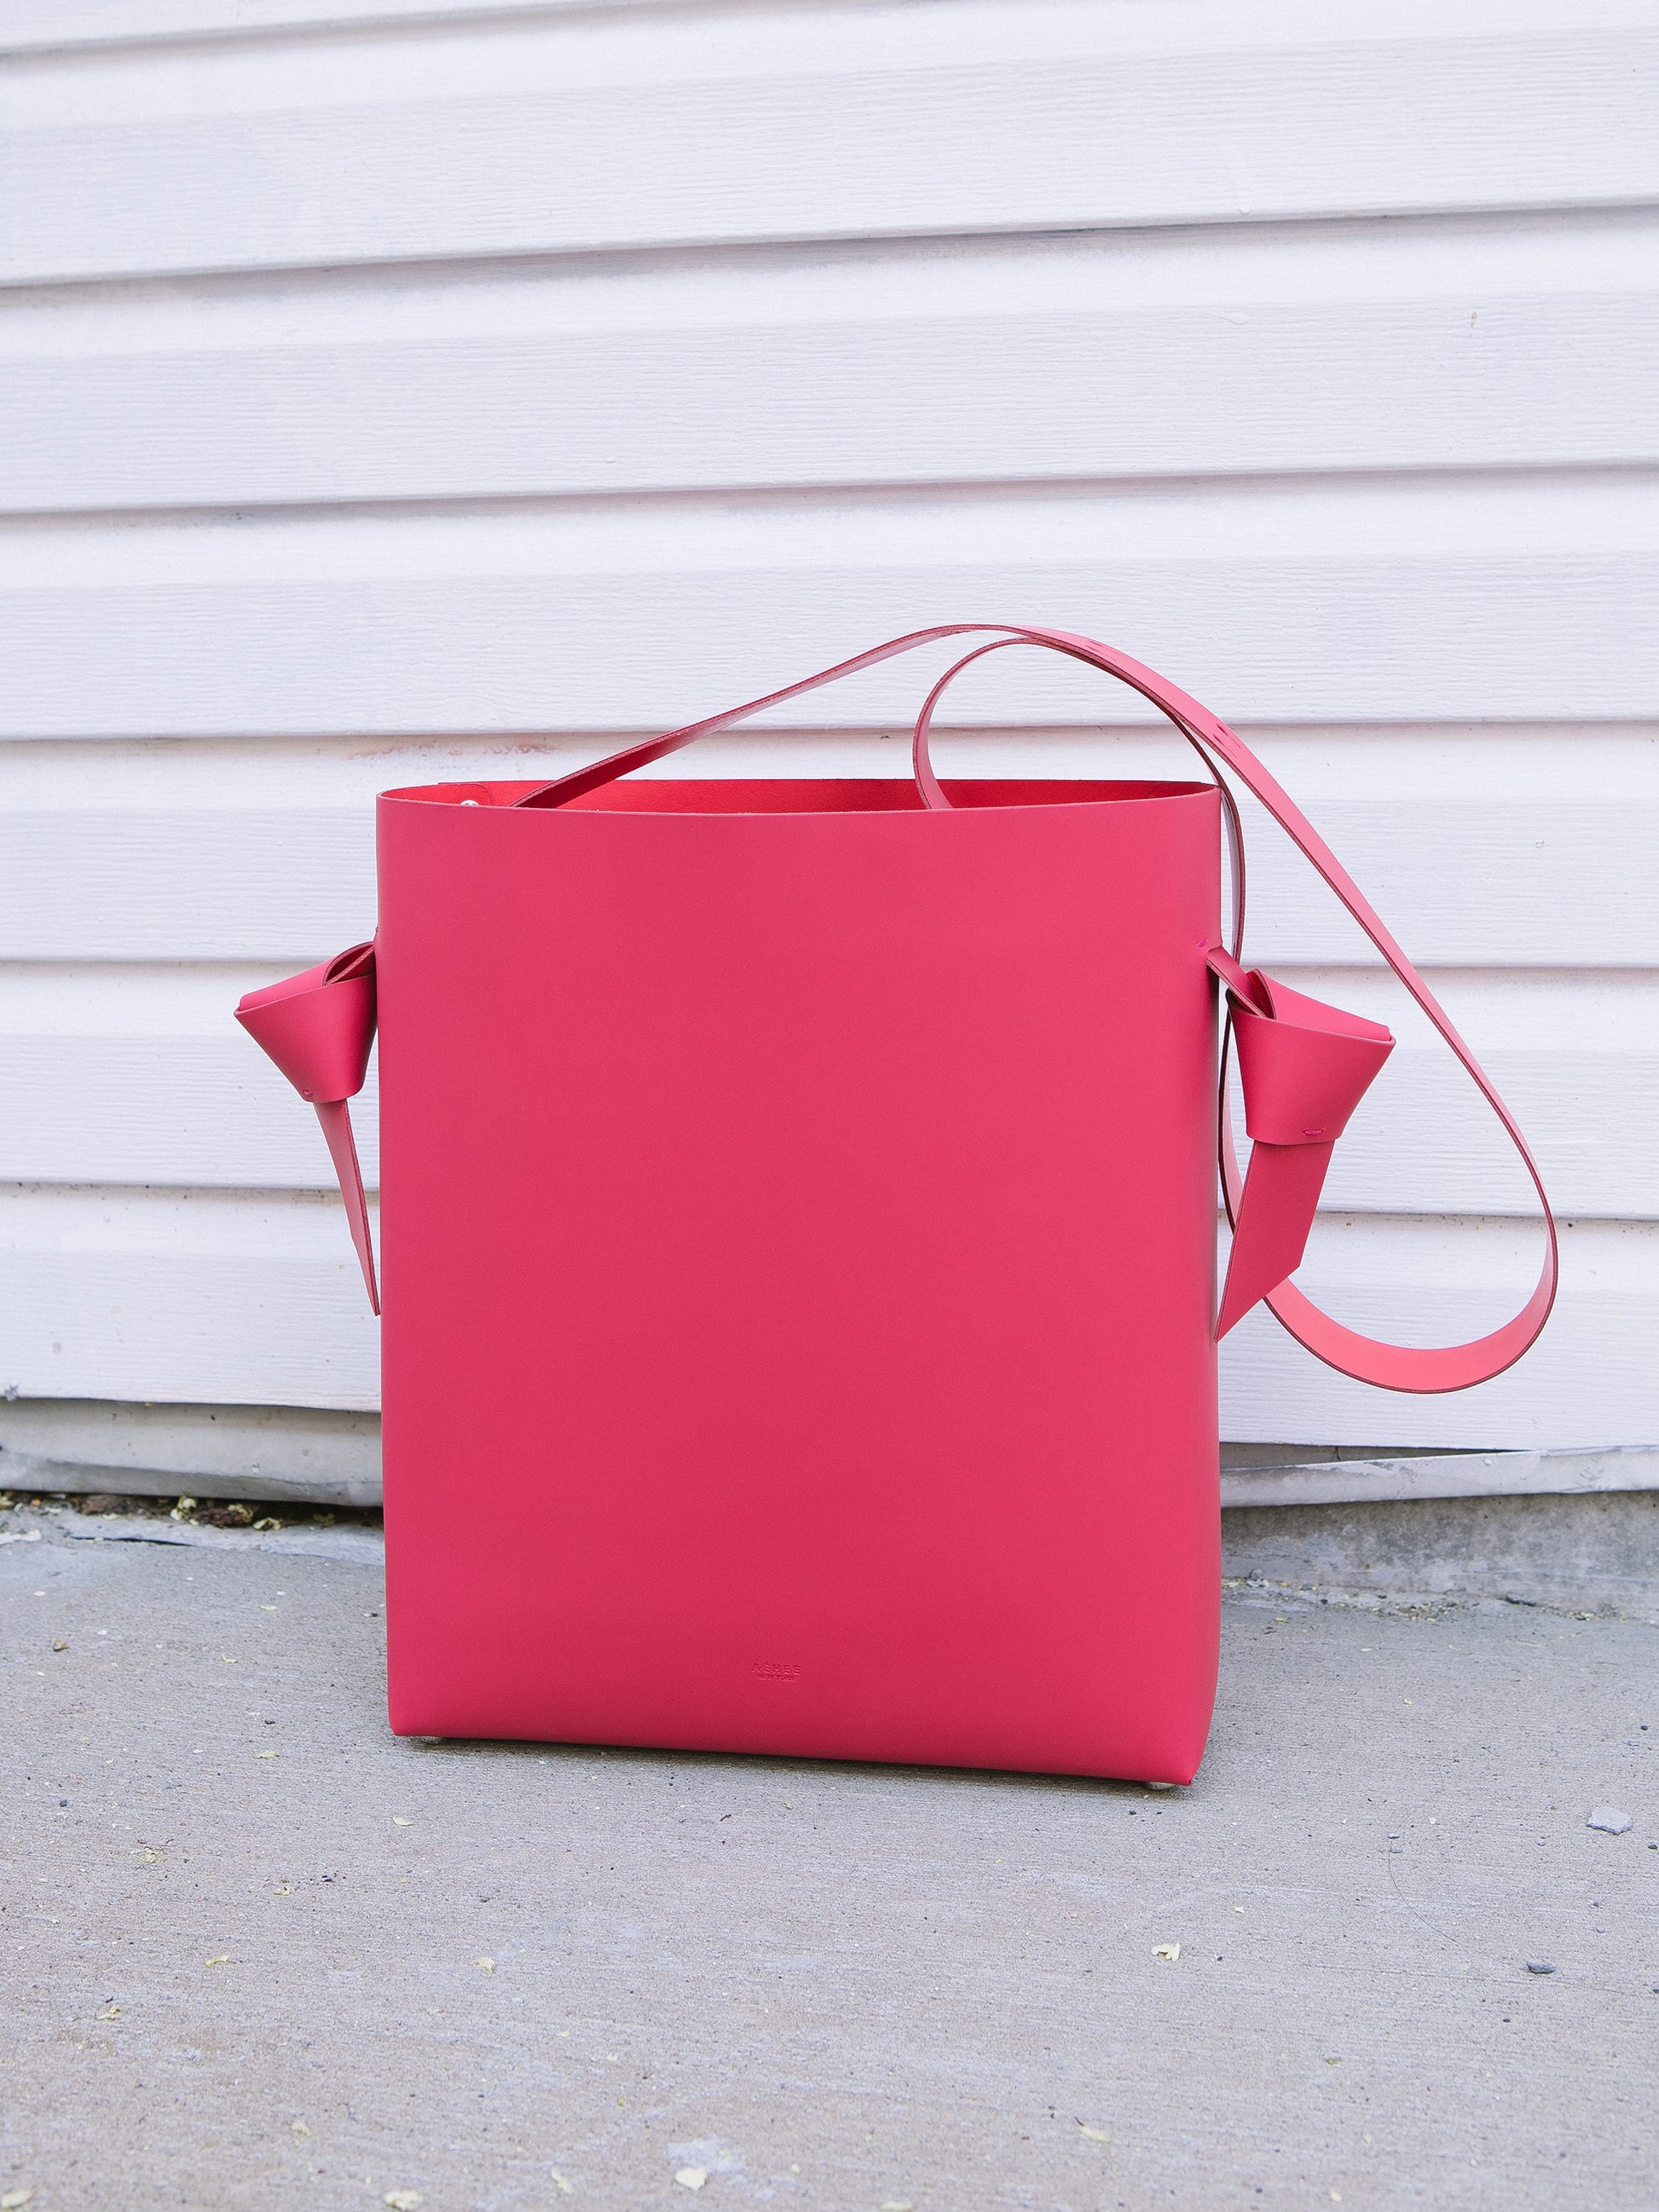 Chic red tote and bucket bag crafted from Italian vegetable tanned leather for a minimal yet sophisticated look.